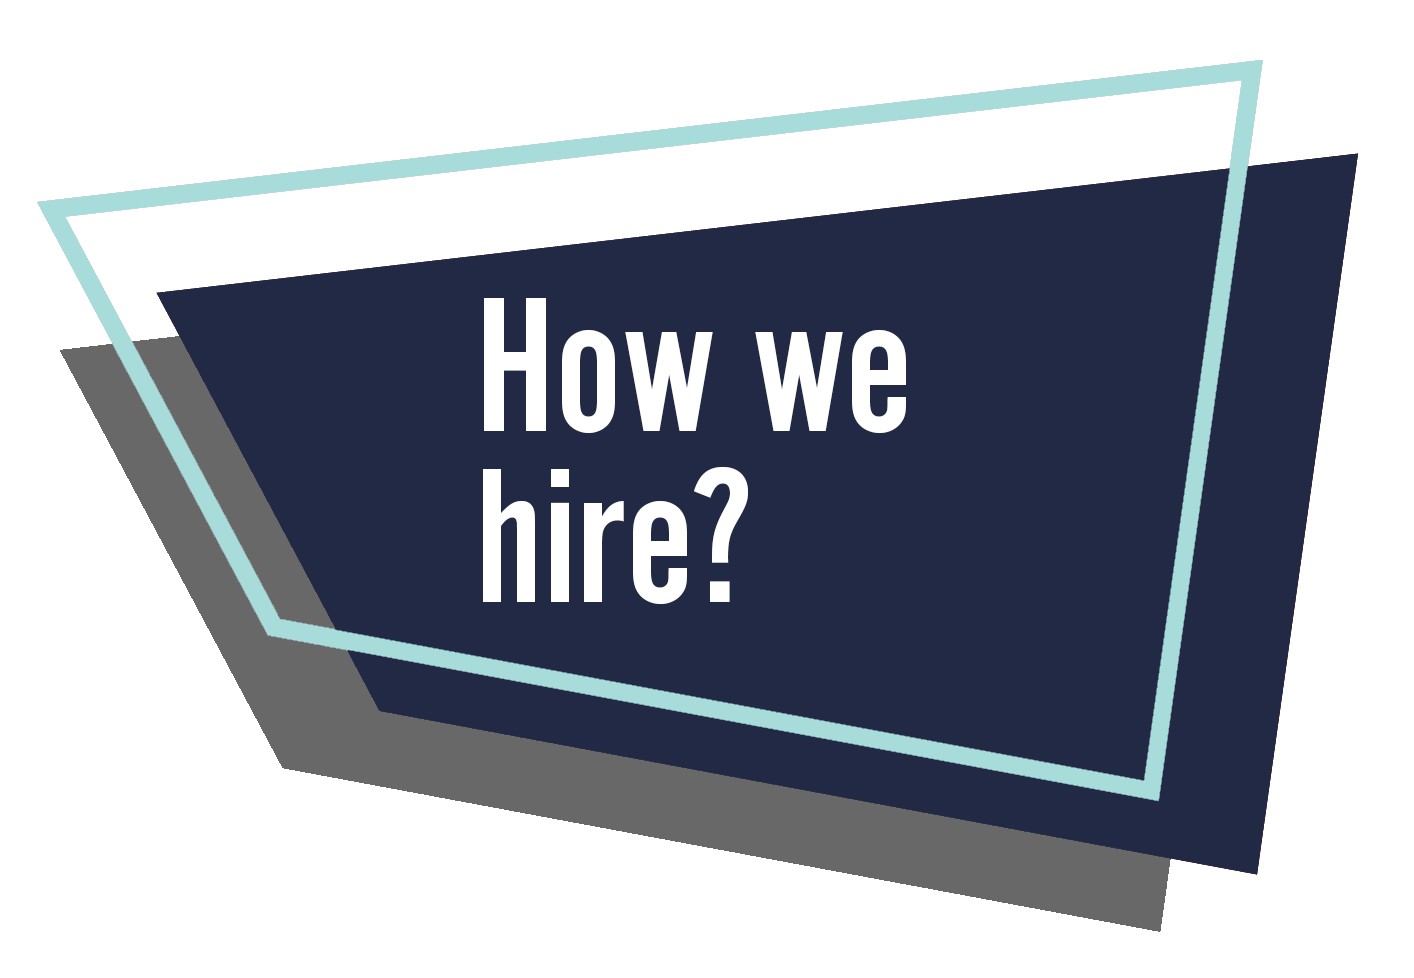 How we hire?